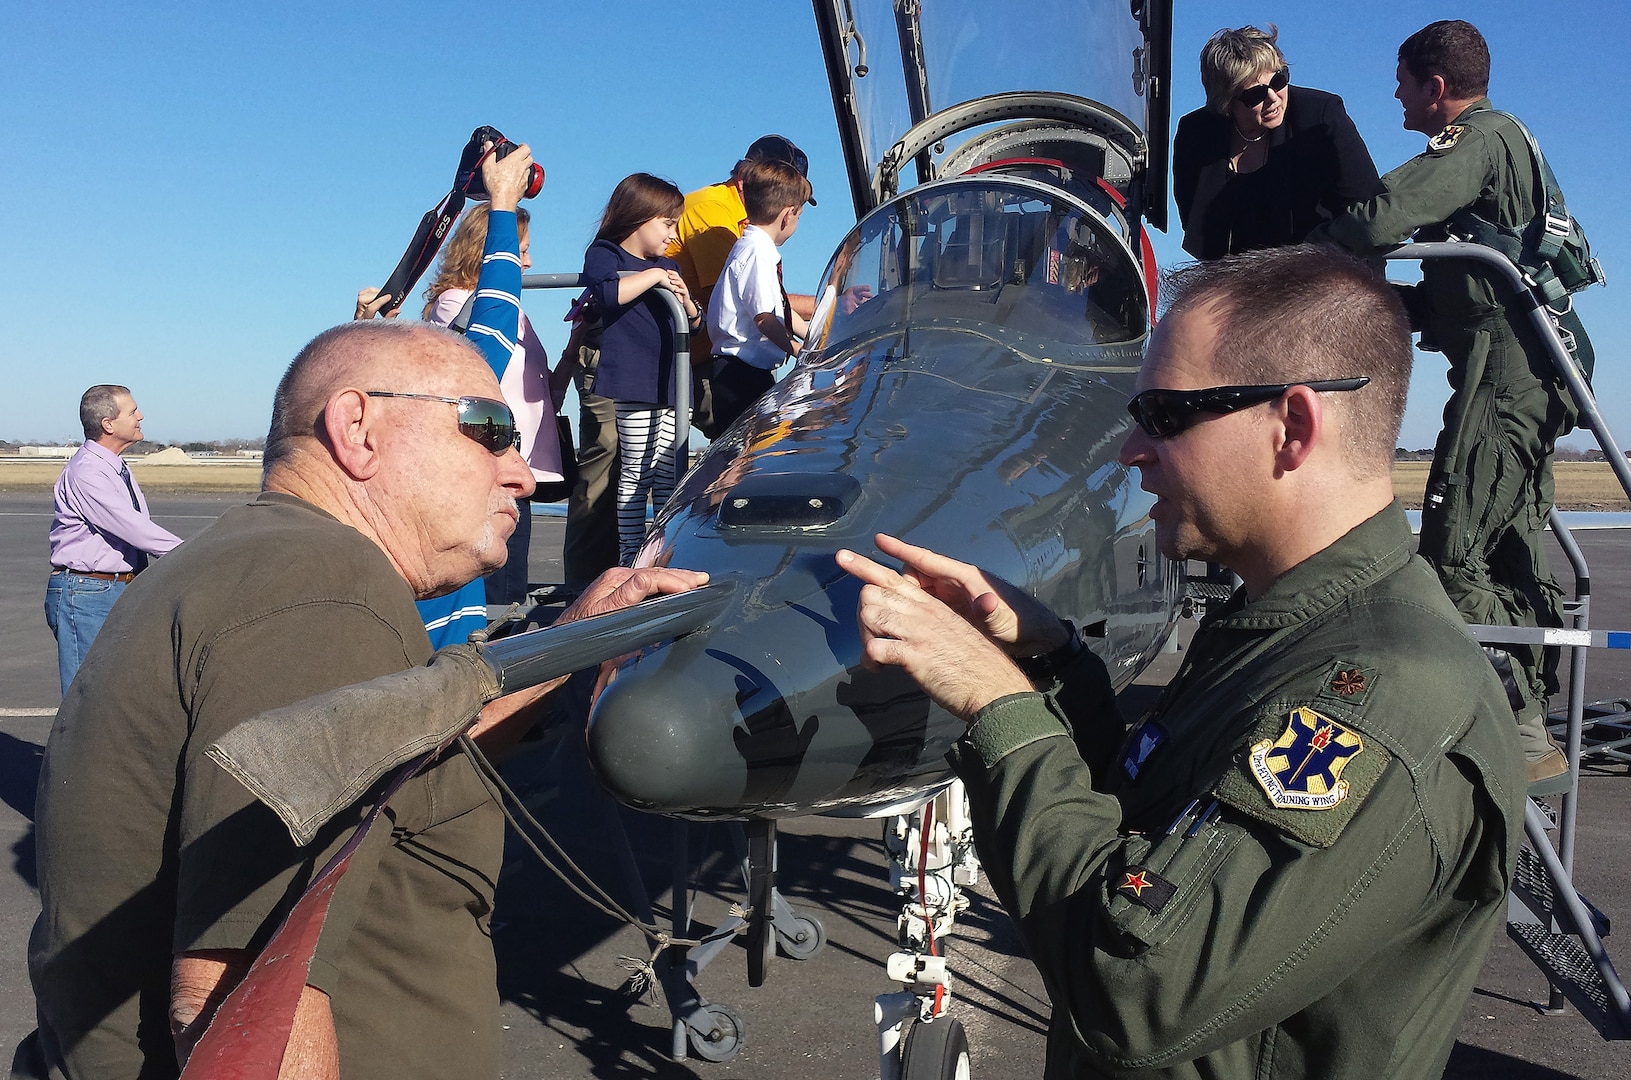 Maj. Robert Lee, 12th Operations Support Squadron, gives a tour of a T-38C Talon to retired Seguin Firefighter Elroy Hoffer during symbolic ribbon cutting event at Joint Base San Antonio-Randolph Seguin Auxiliary Airfield Jan. 20. The event signified the reopening of the airfield following a $12.4 million repaving and construction project that included replacing and grading the entire airfield, stabilizing existing soils, and constructing a new taxiway, parking apron and emergency access road.  (U.S. Air Force photo by Johnny Saldivar)